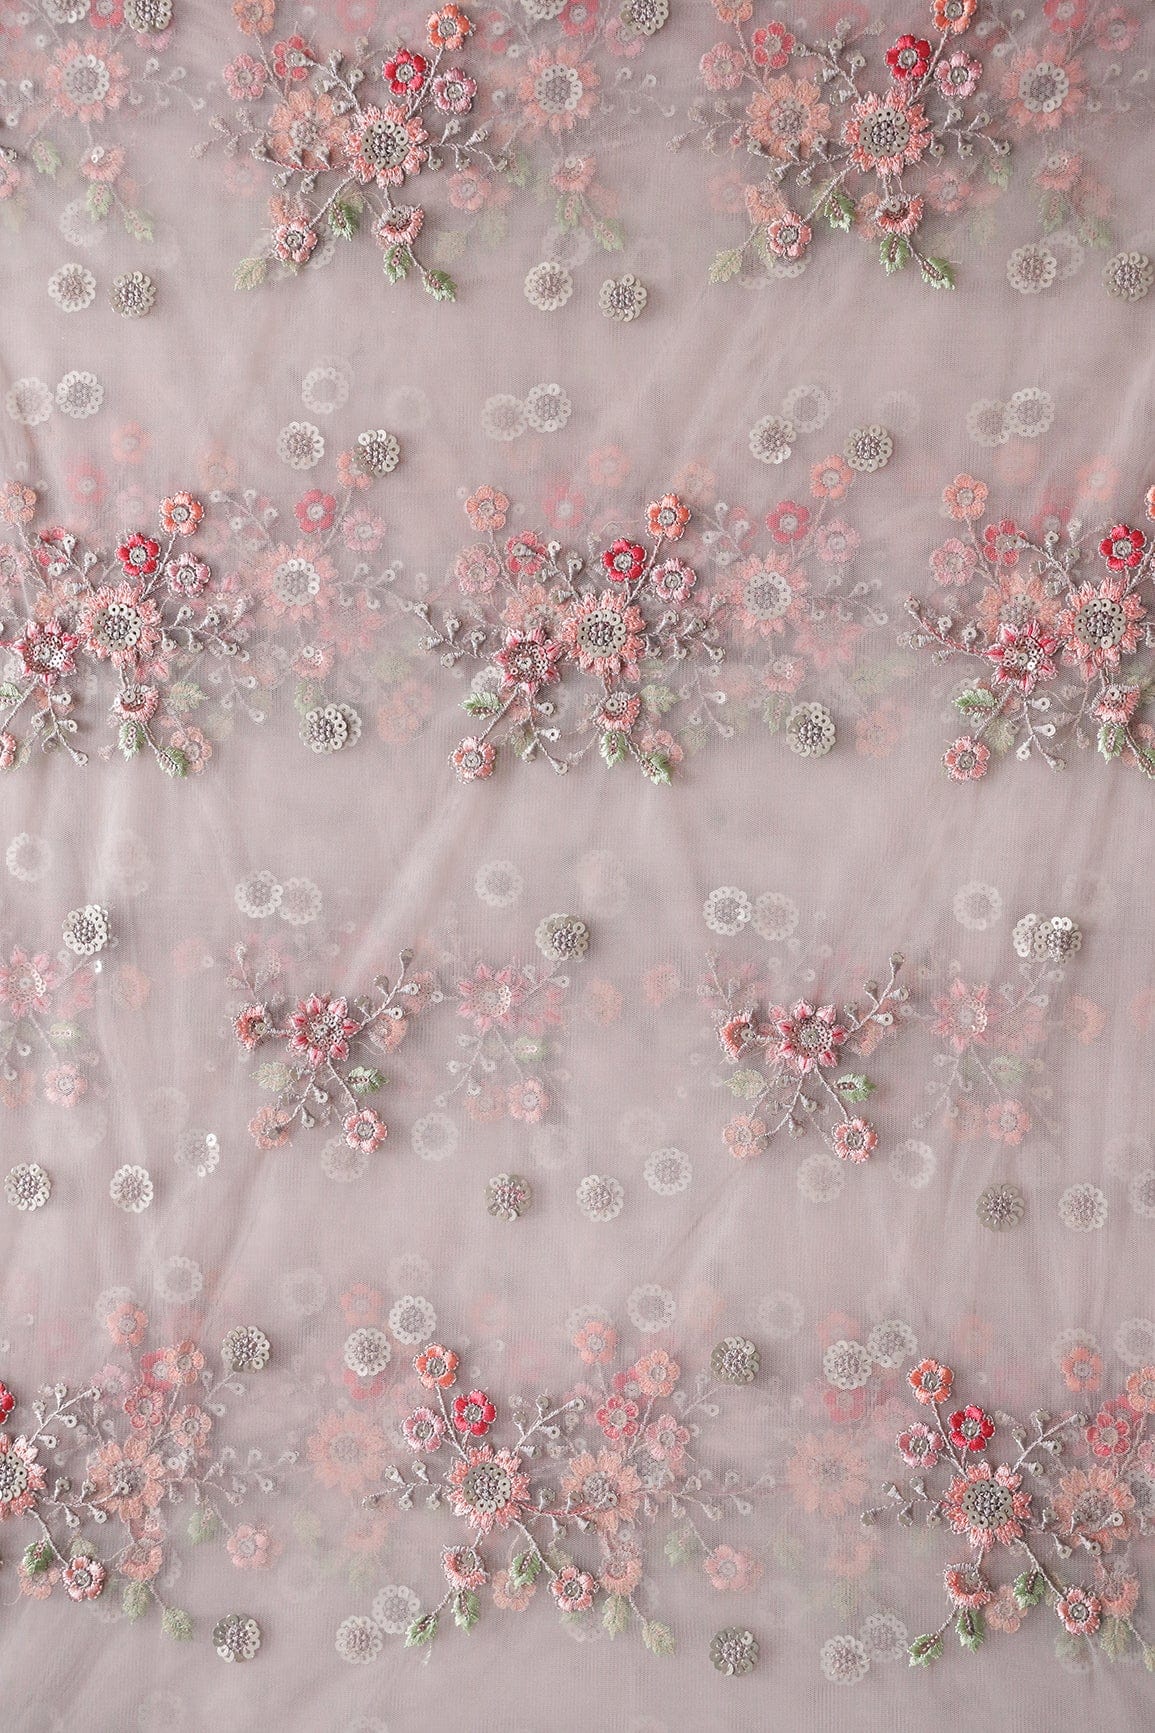 doeraa Embroidery Fabrics Multi Thread With Gold Sequins Floral Butta Embroidery On Light Grey Soft Net Fabric